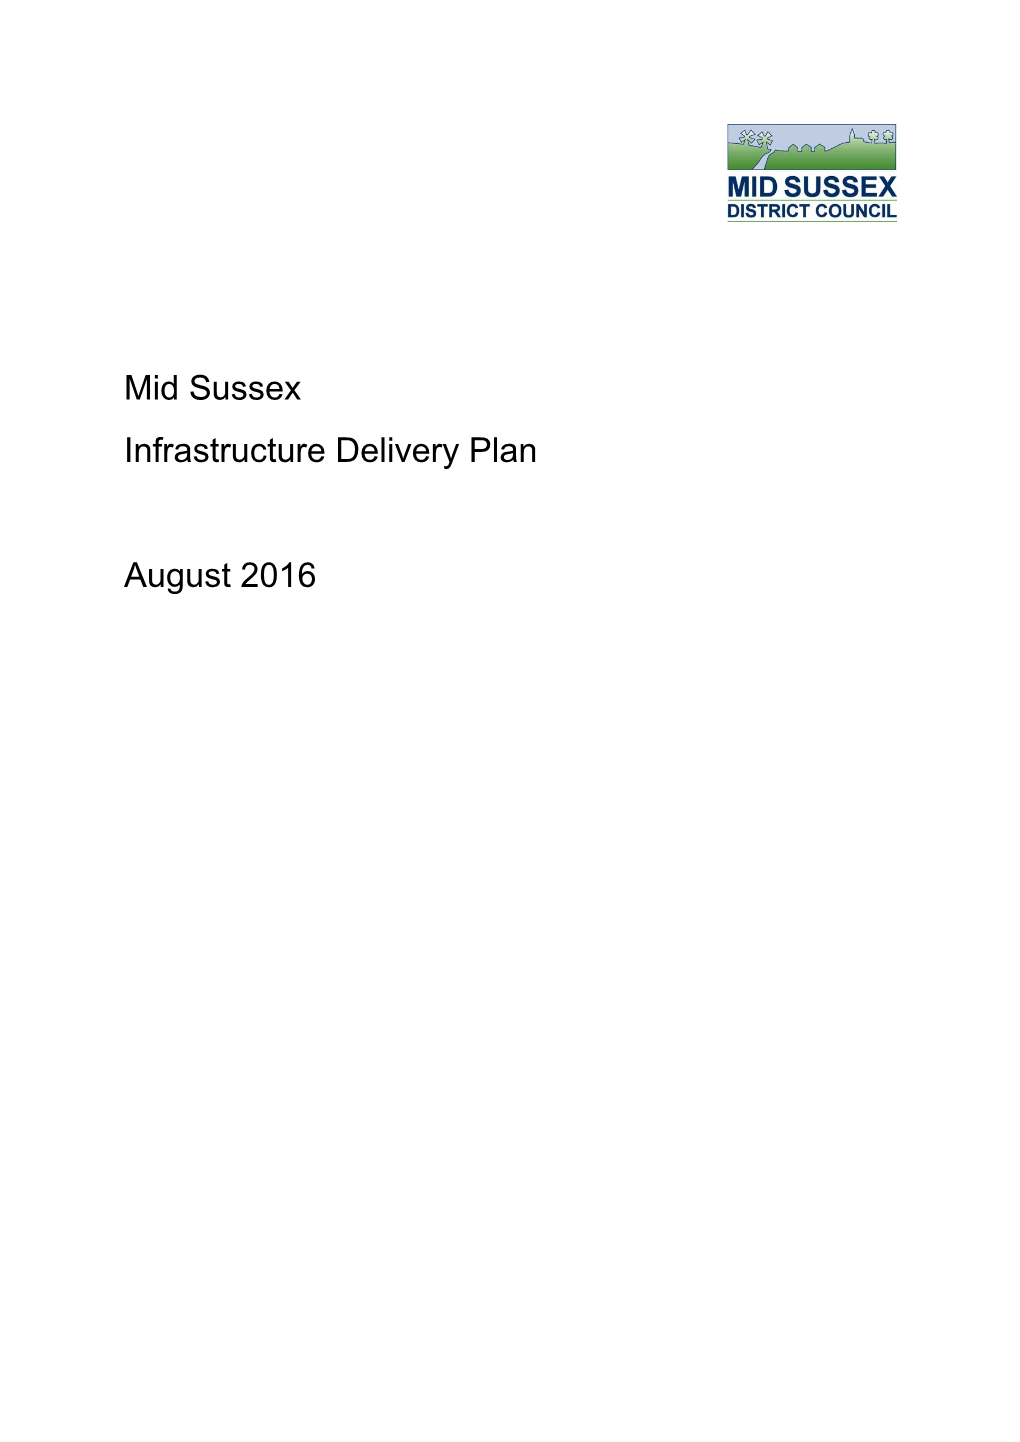 Mid Sussex Infrastructure Delivery Plan